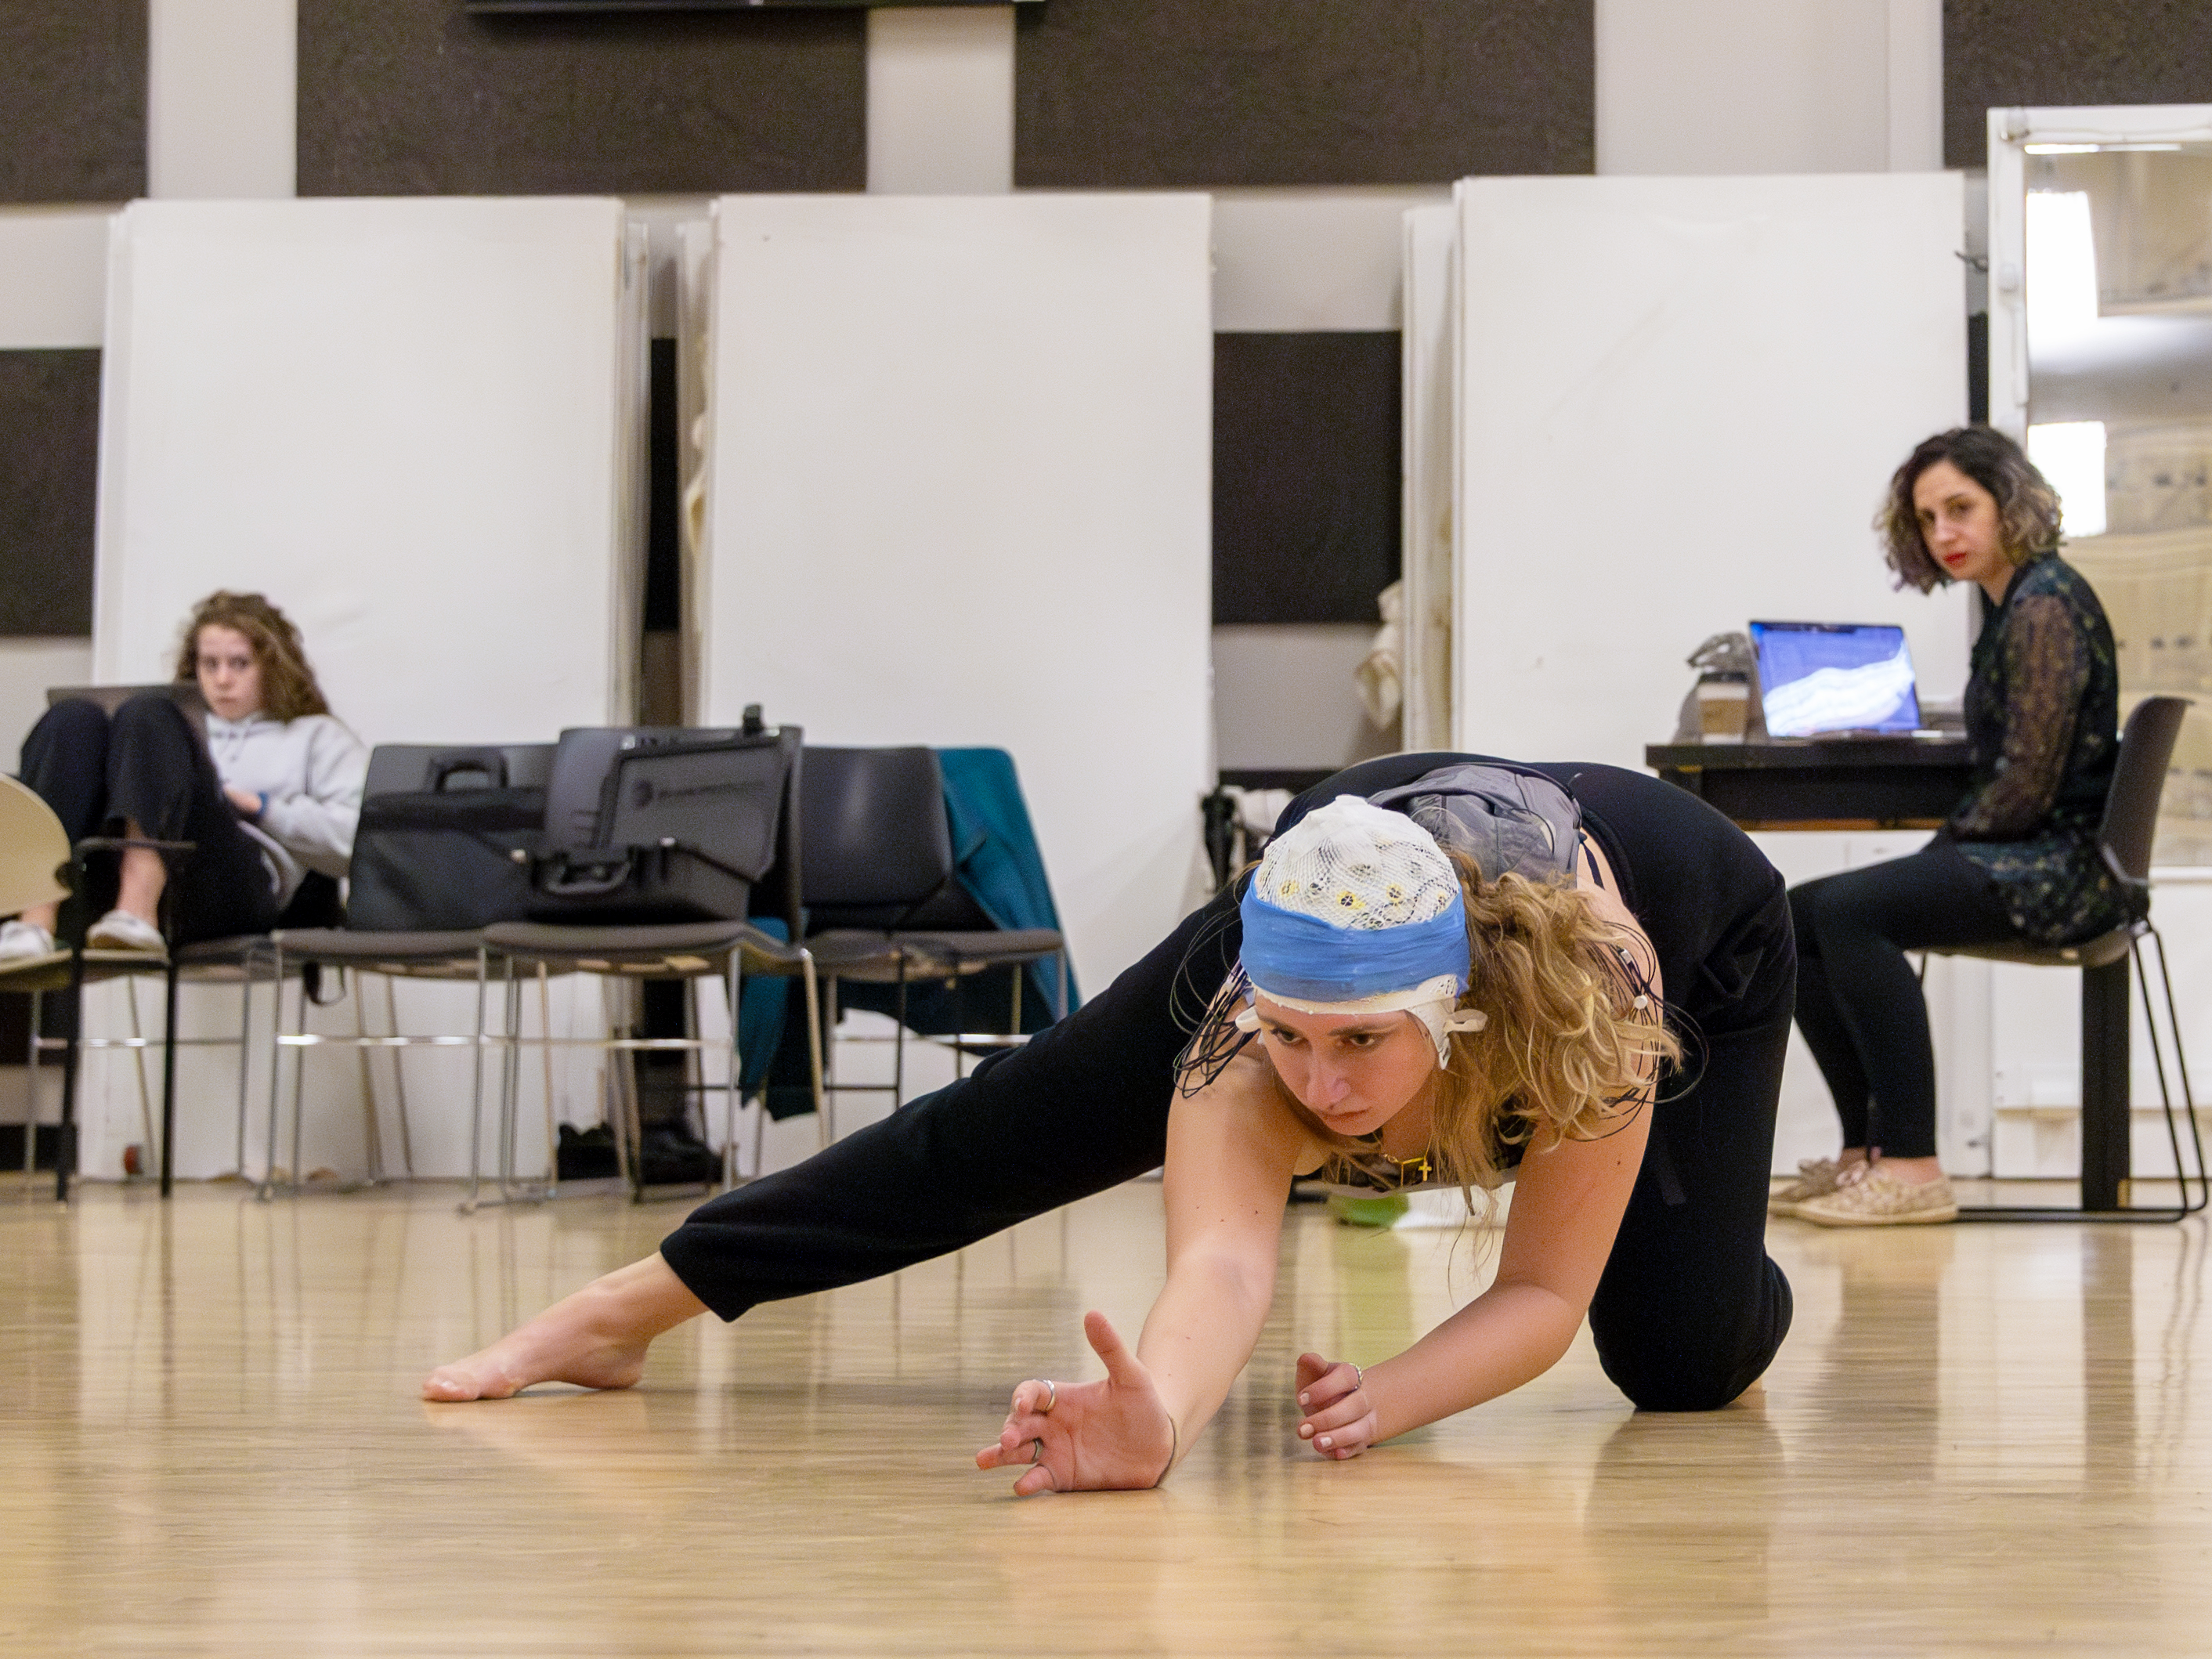 Meredith Peck performs a dance routine wearing an EEG cap